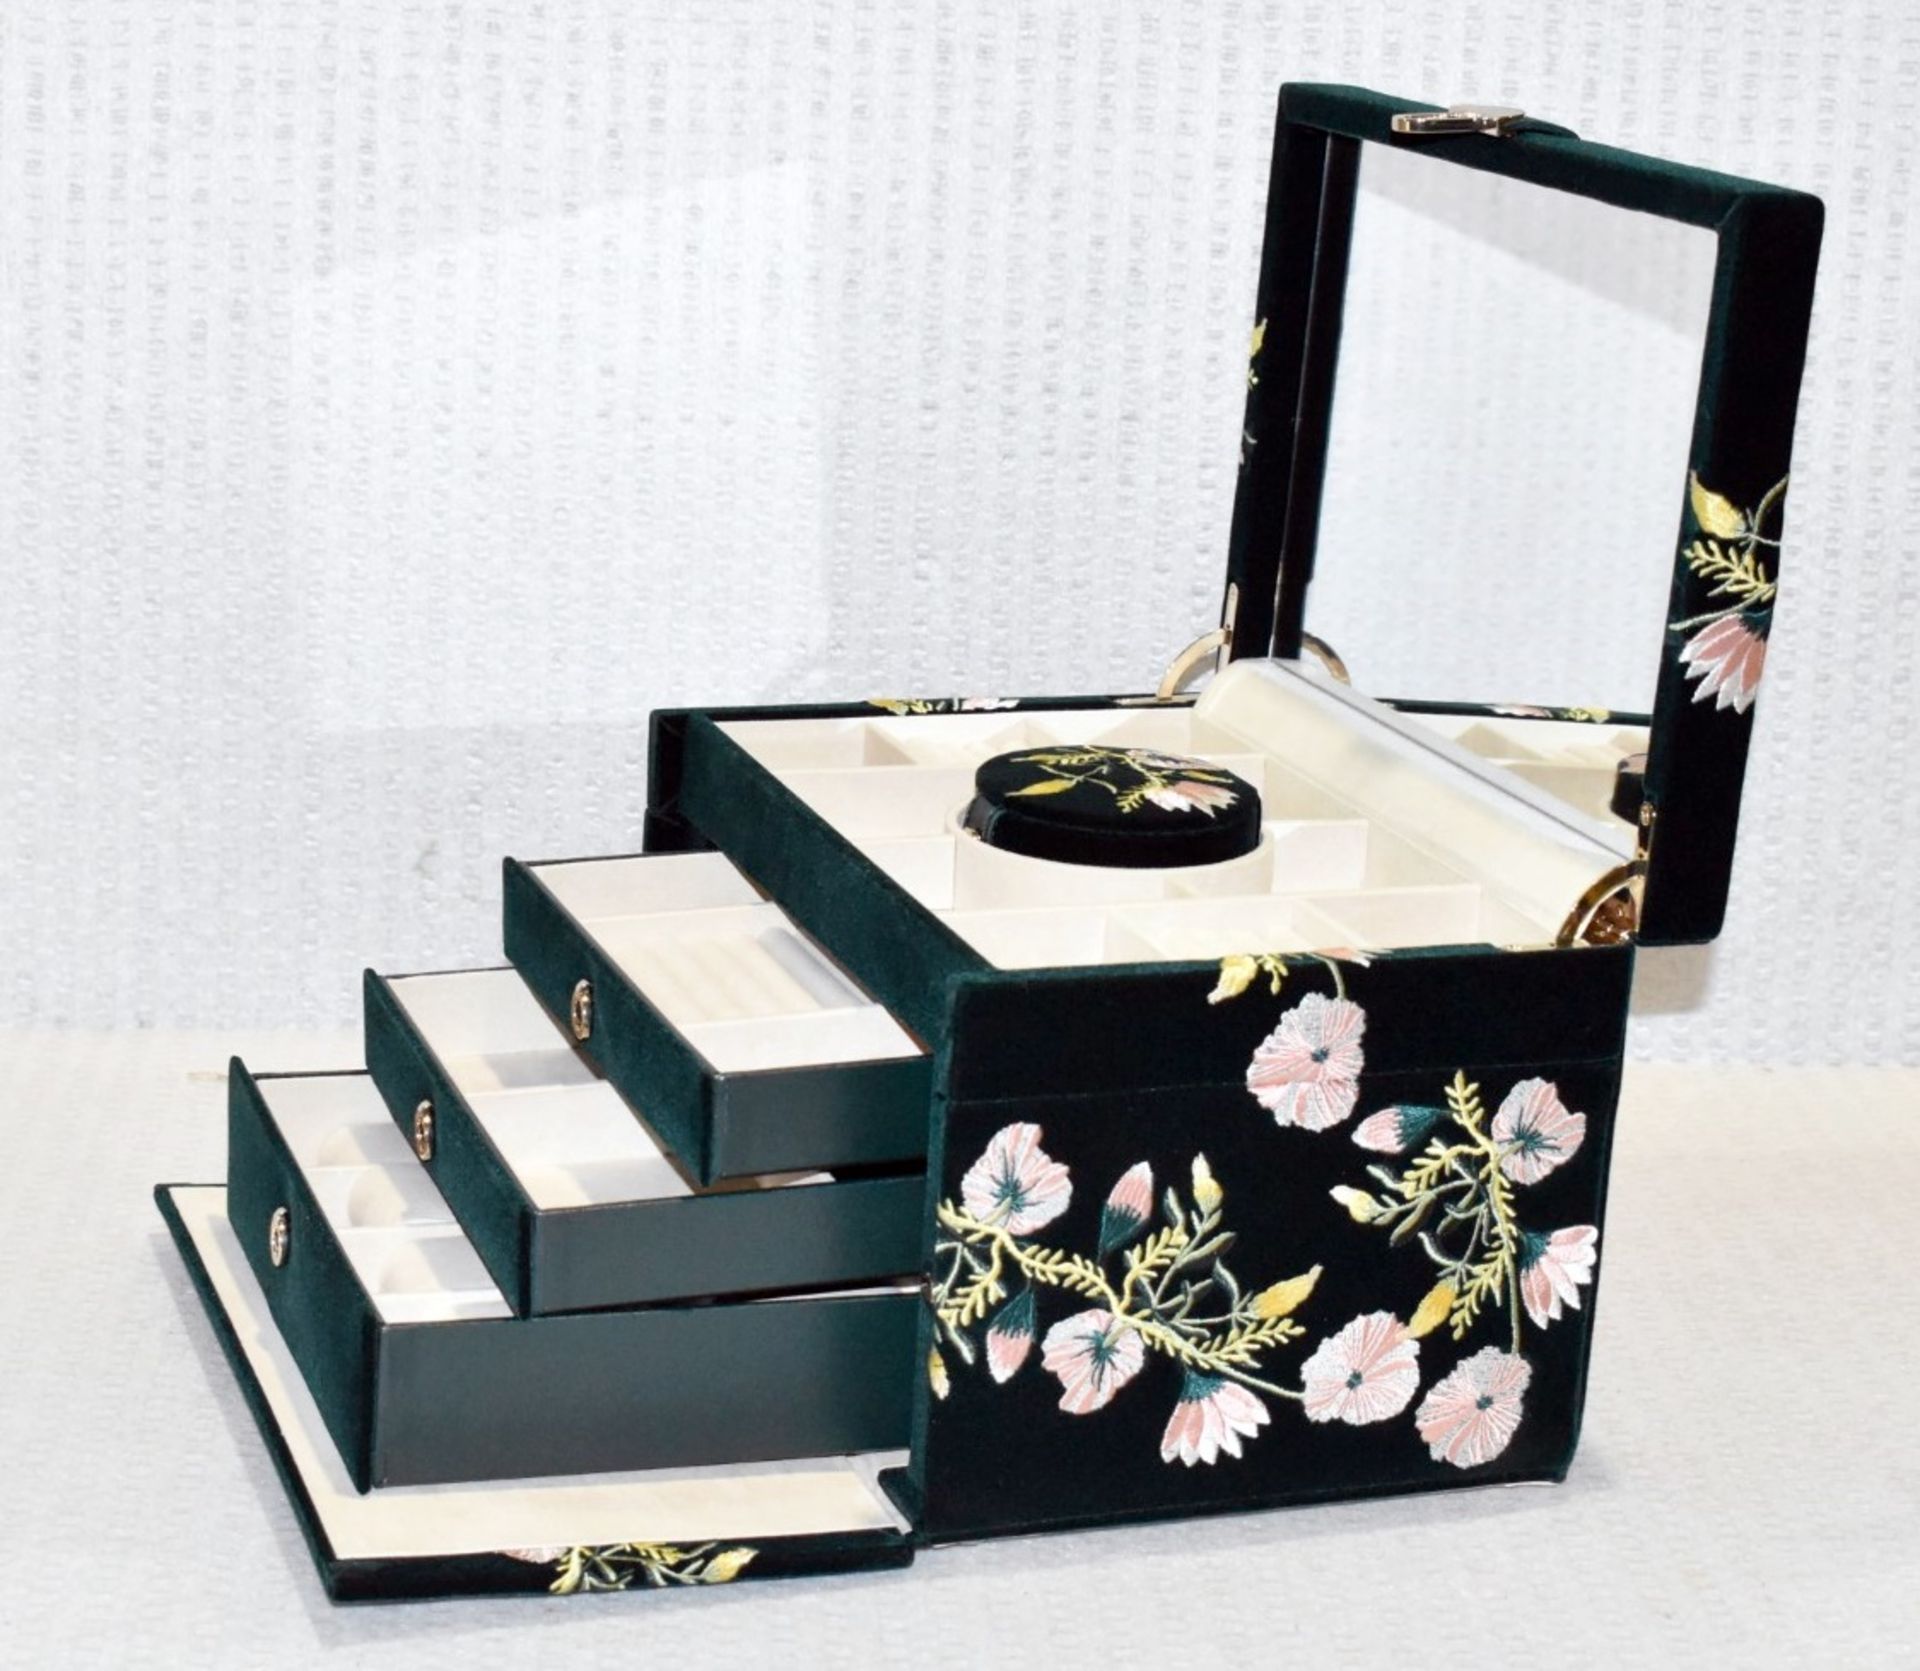 1 x WOLF 'Zoe' Large Luxury Embroidered Jewellery Box, Upholstered in Green Velvet - RRP £739.00 - Image 8 of 10